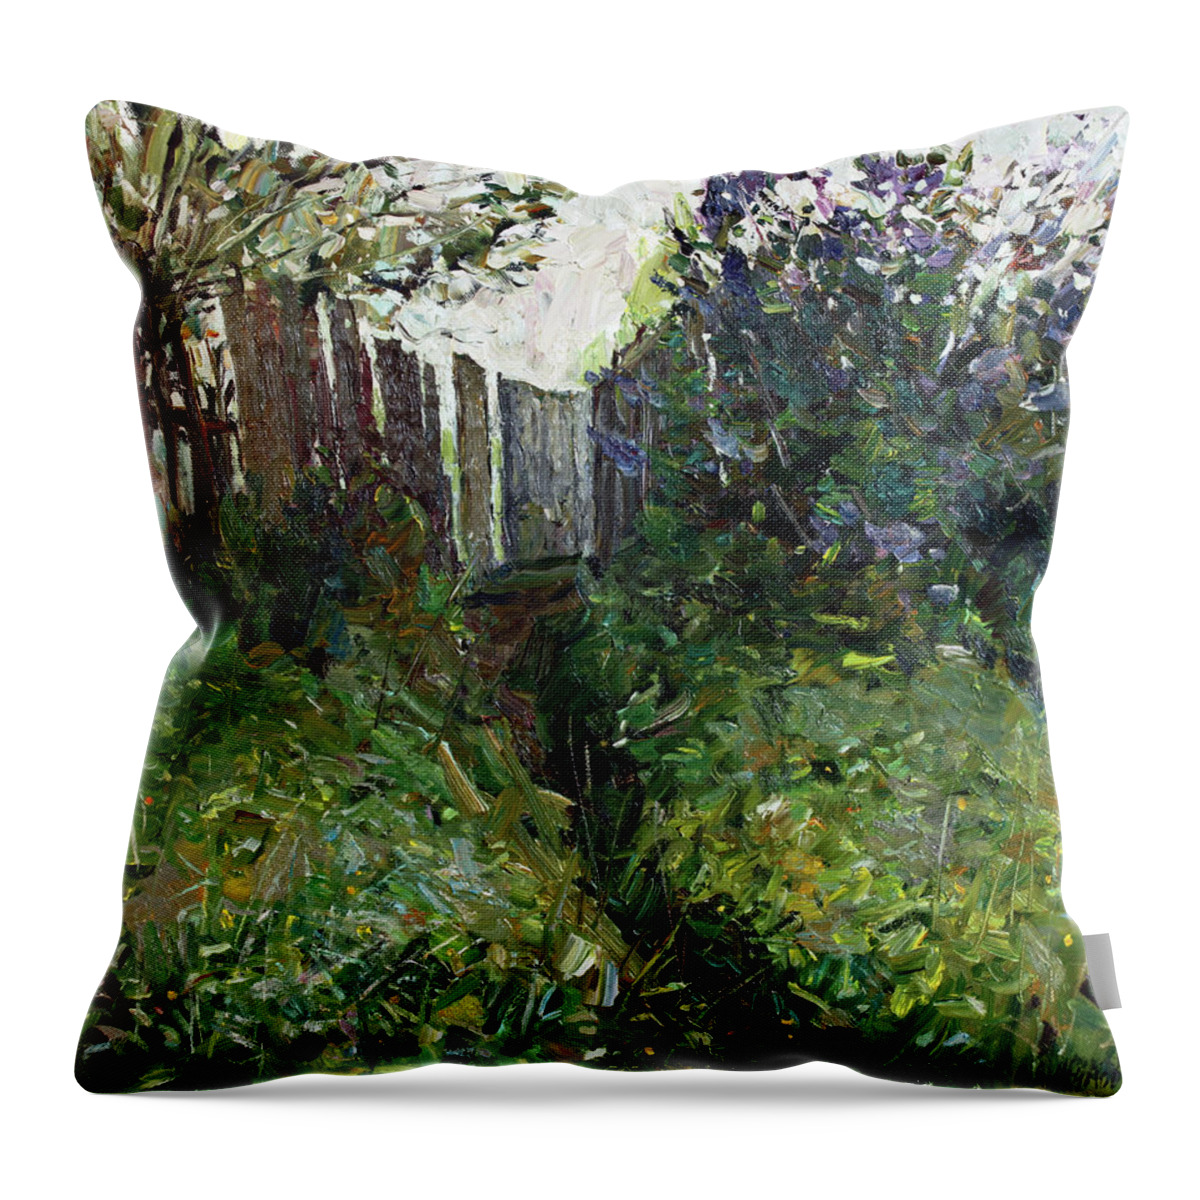 Plein Air Throw Pillow featuring the painting Lilac near old fence by Juliya Zhukova